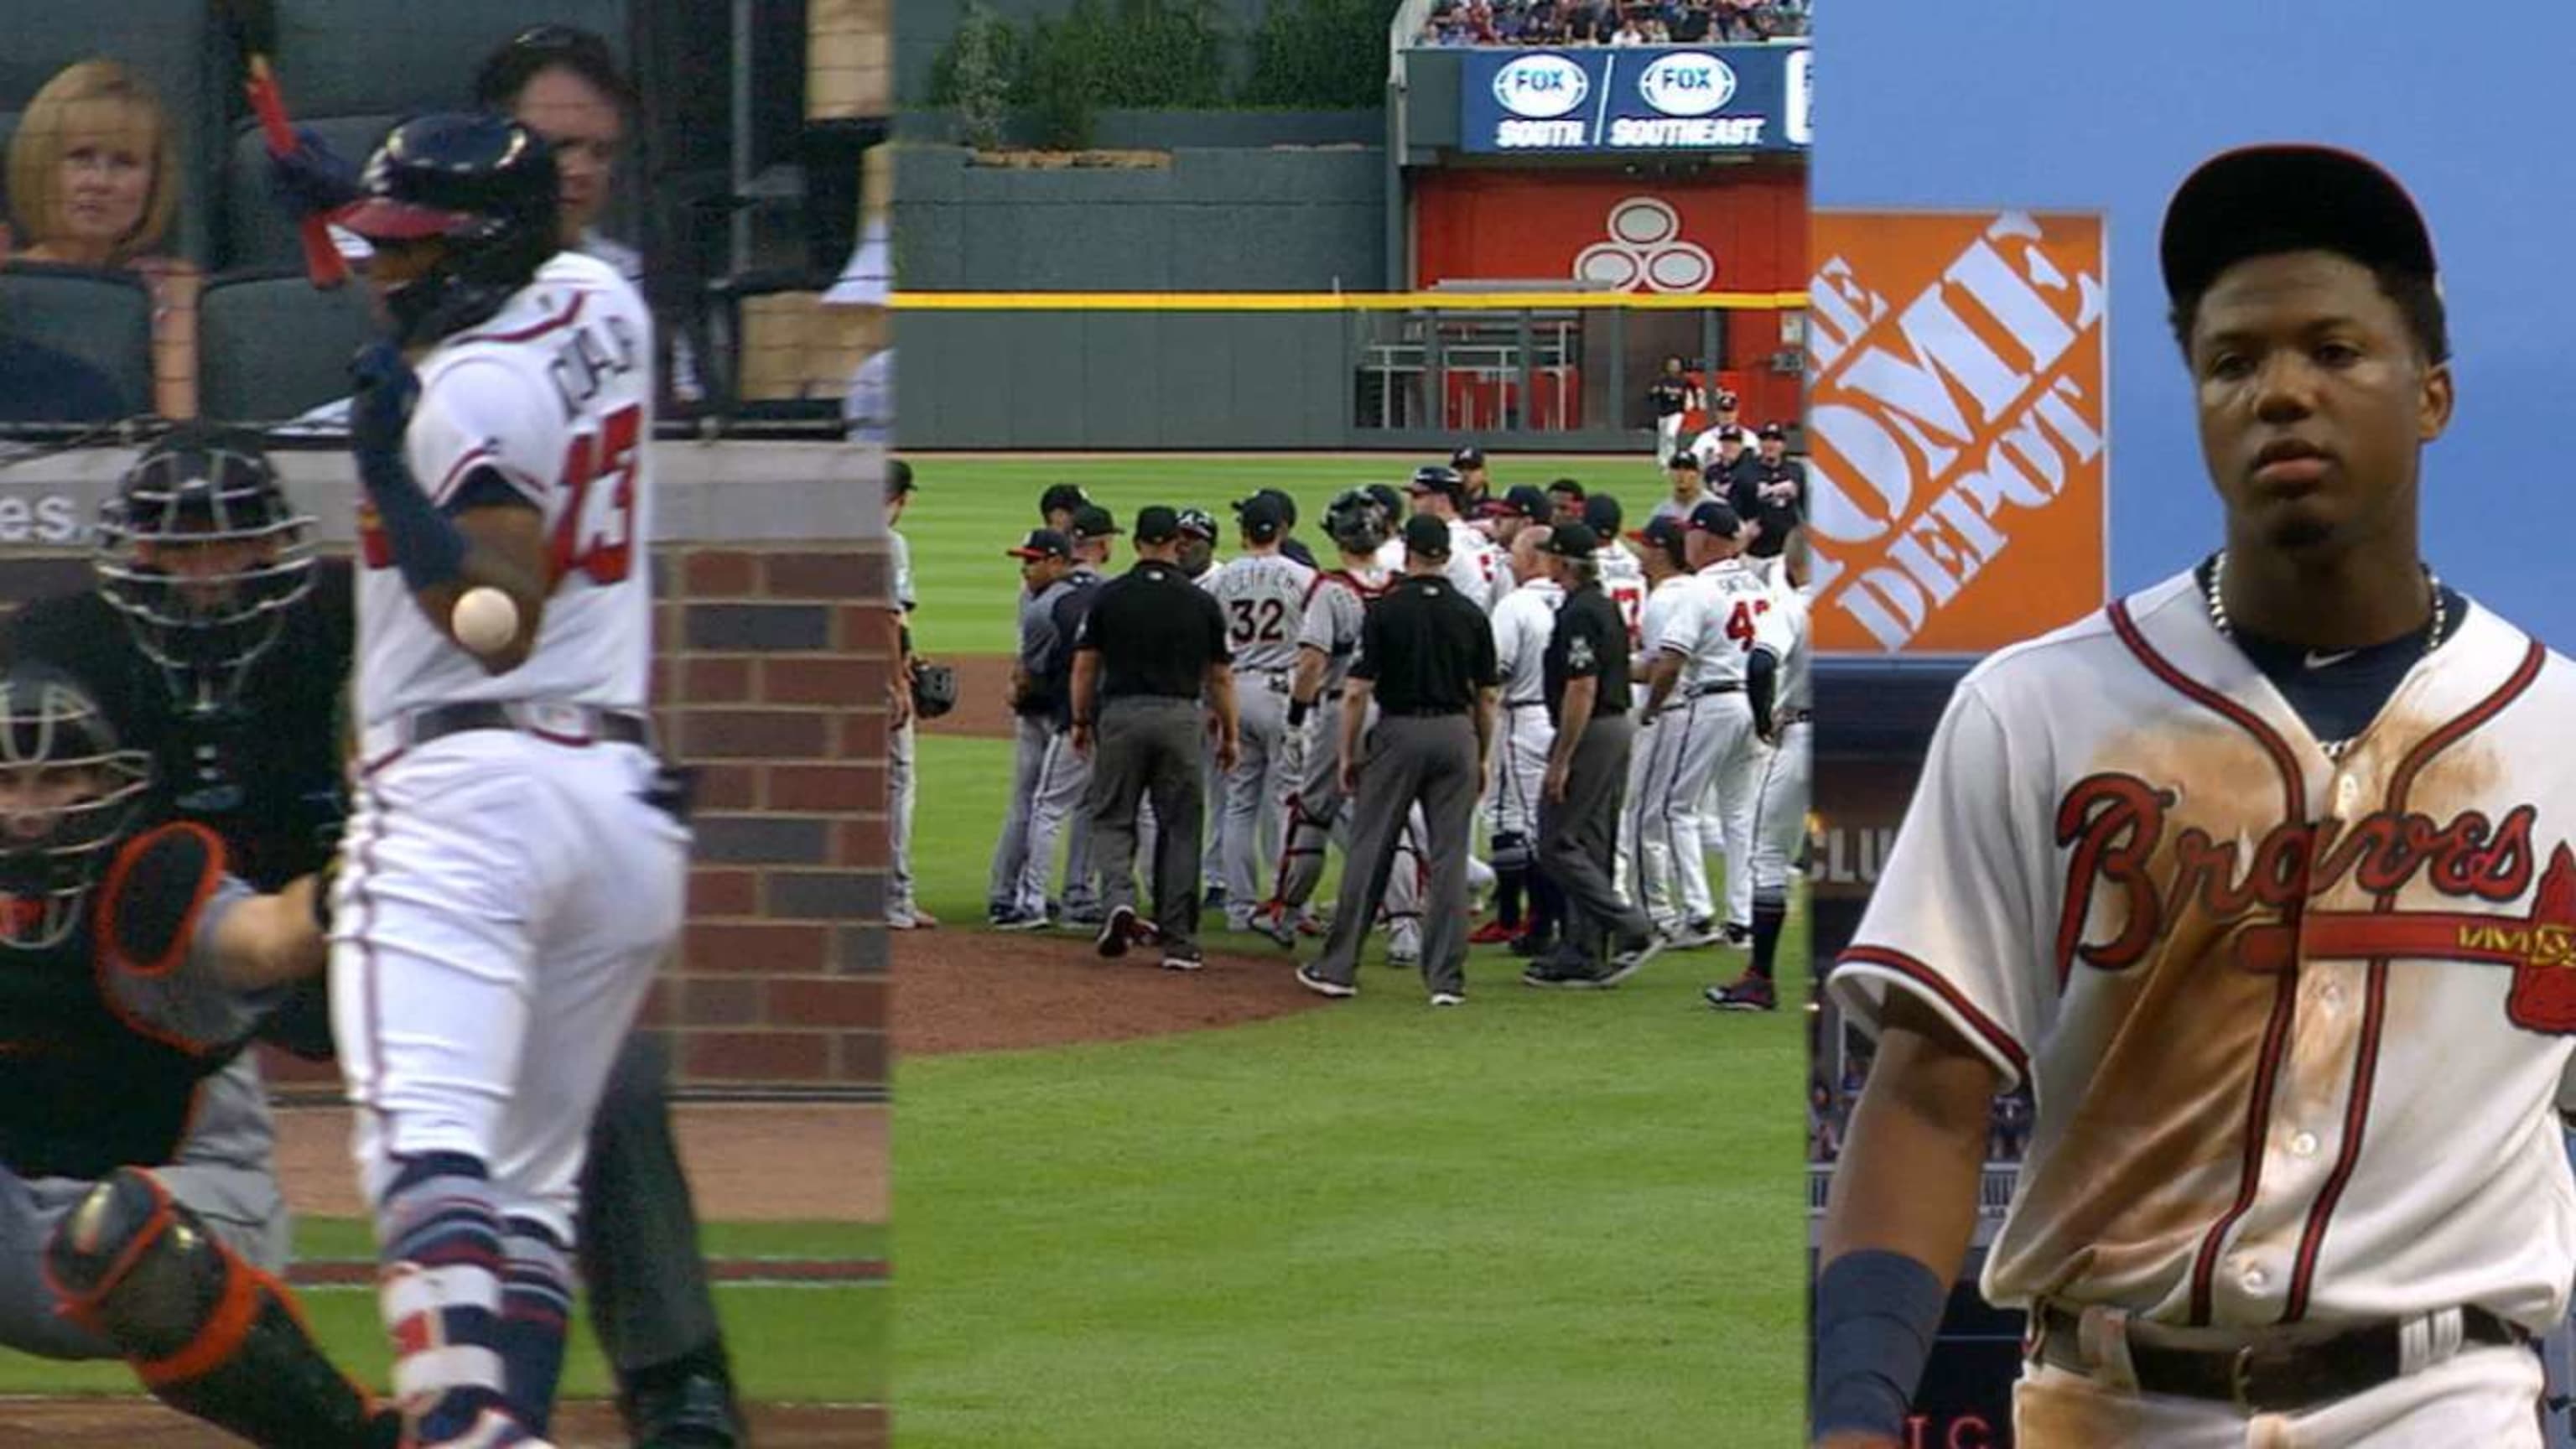 Reactions to Ronald Acuna hit by pitch